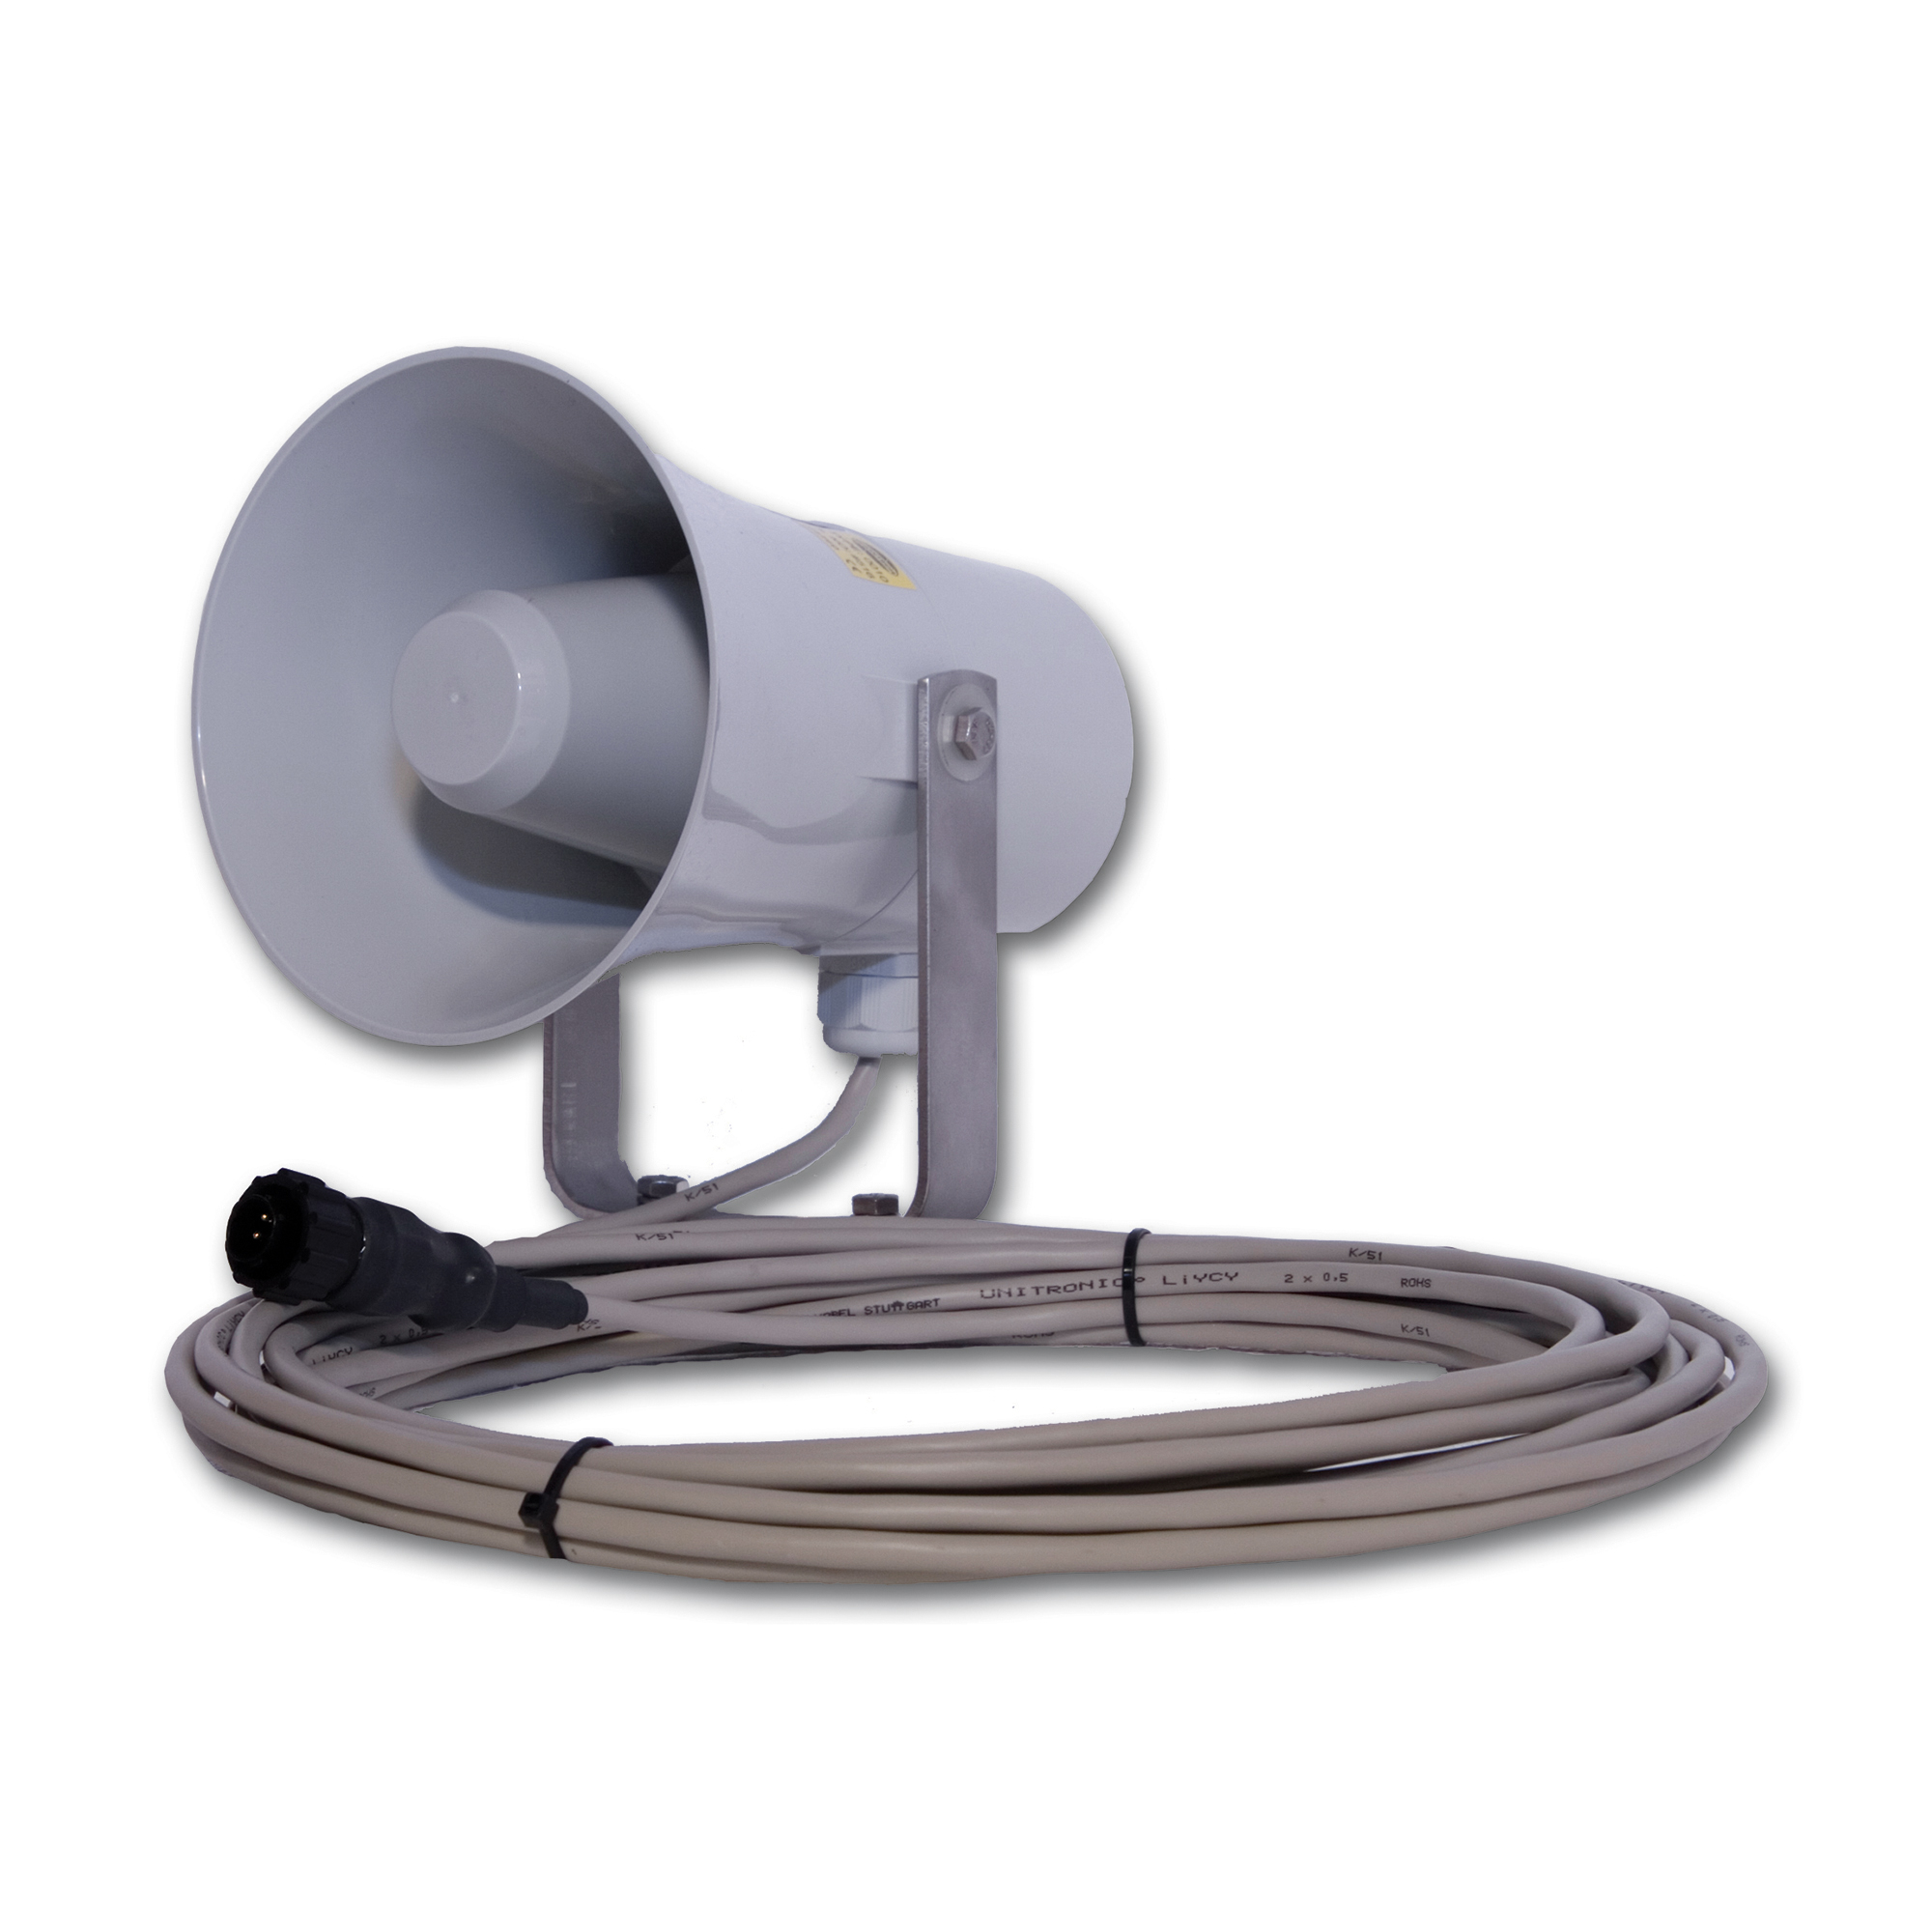 4000011252 P-0010 Portable Talk-back Unit w/10m cable and plug (for 9009), incl. wall bracket